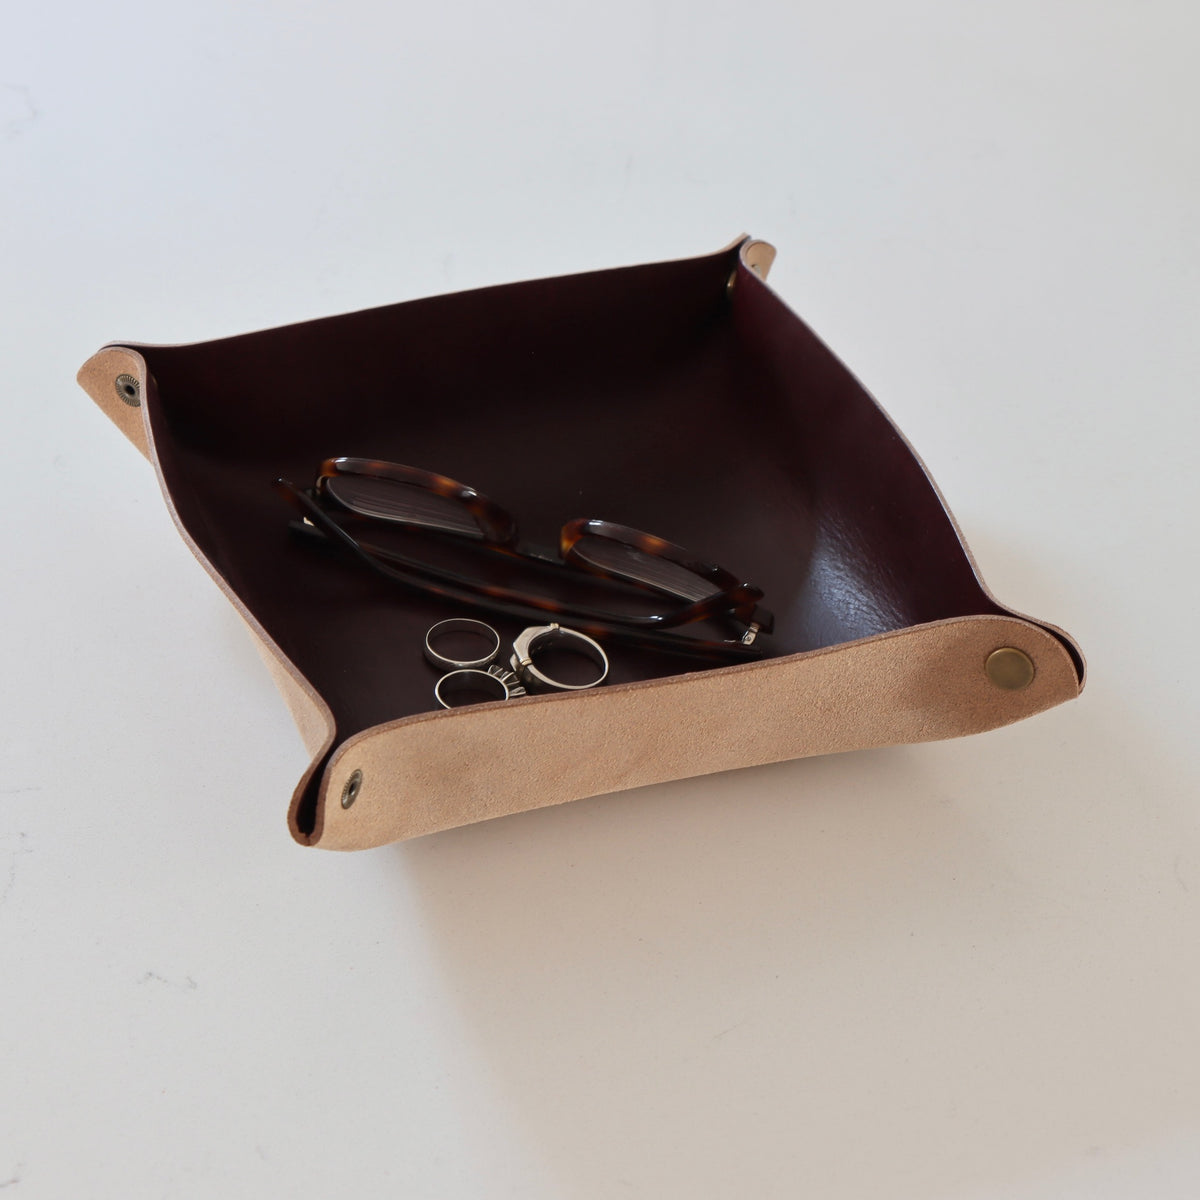 Leather Valet Tray in Horween Burgundy Leather - Holistic Habitat 